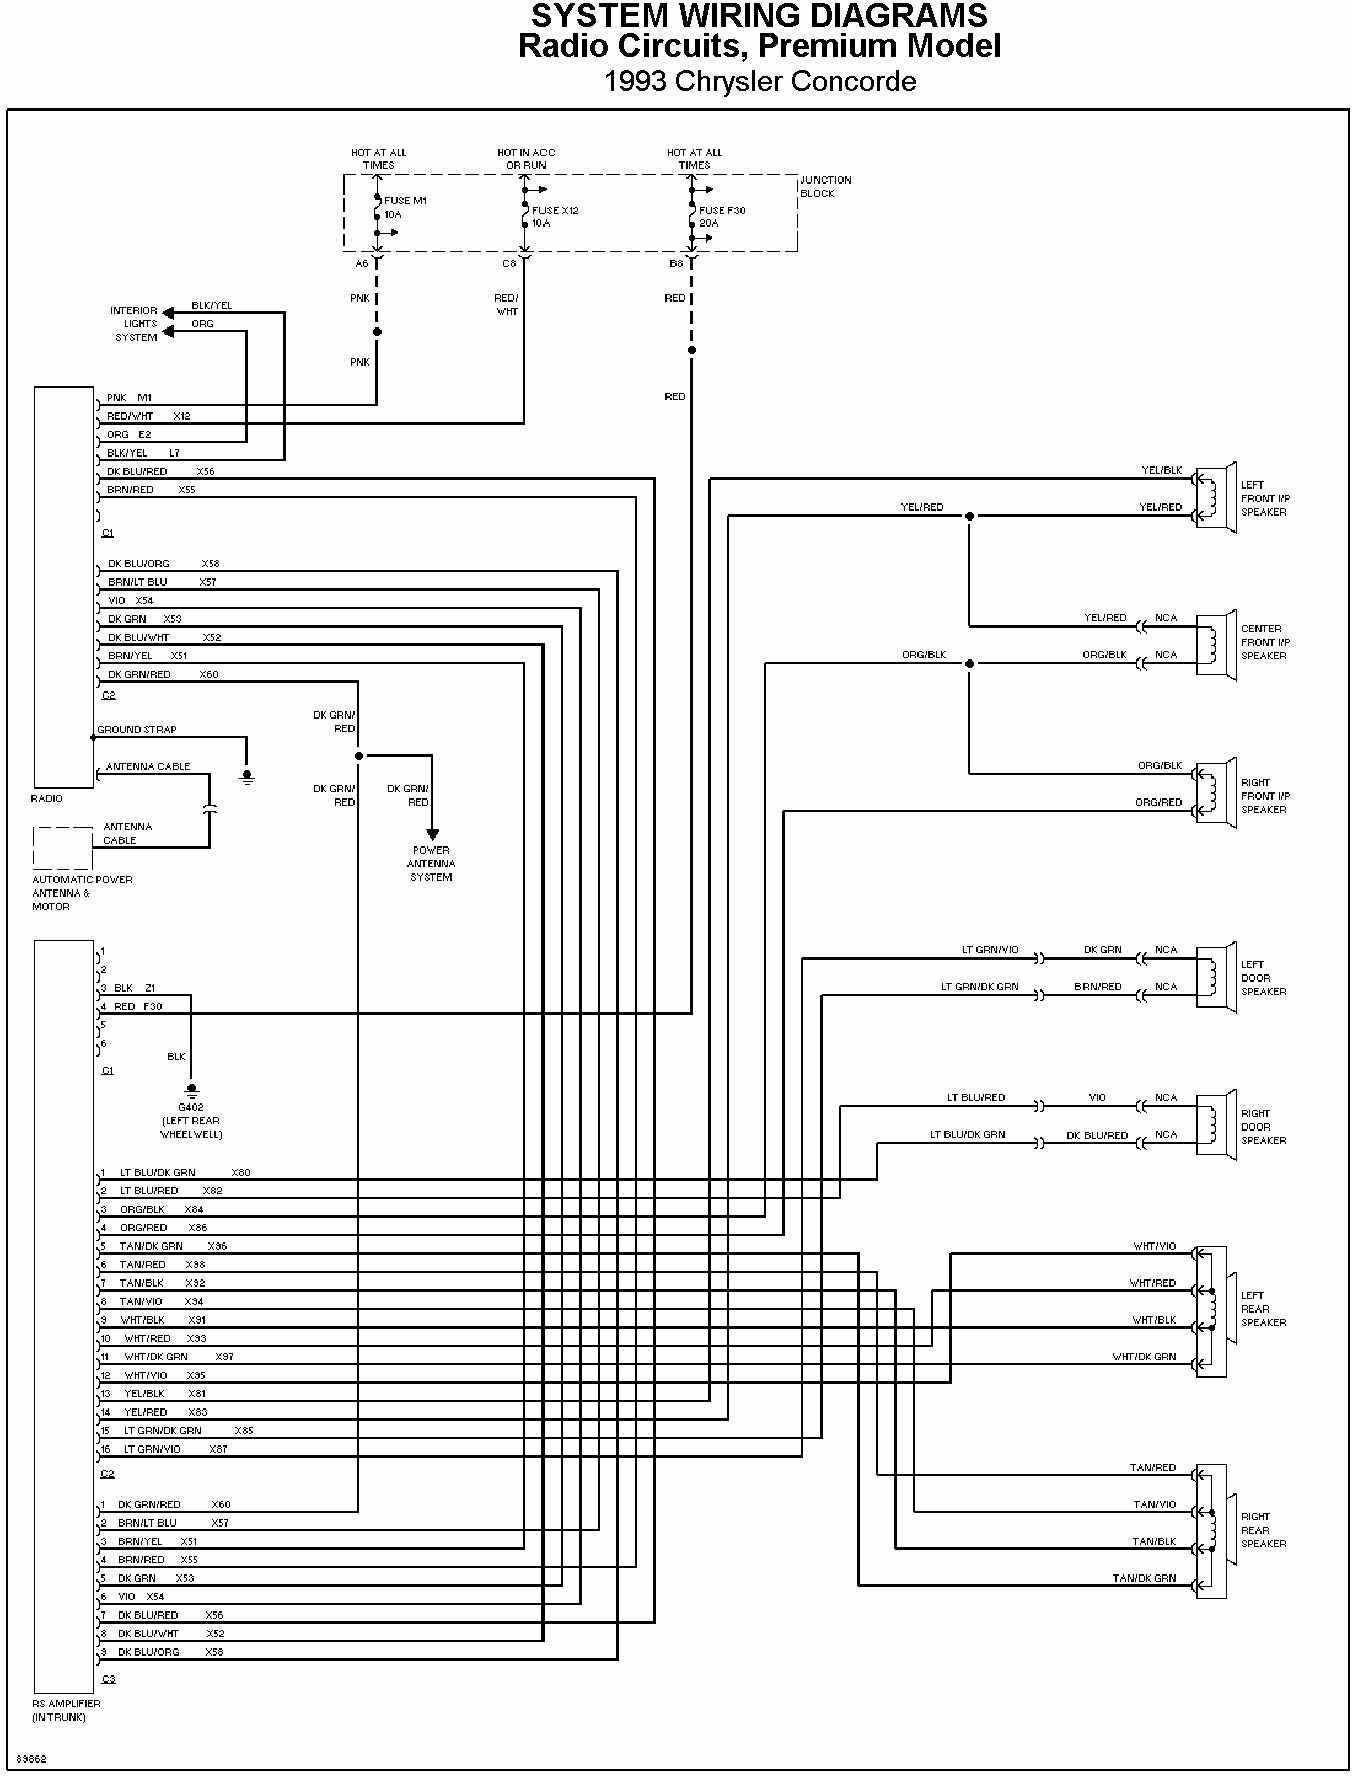 Aftermarket Wiring Harness Diagram from www.automotive-manuals.net